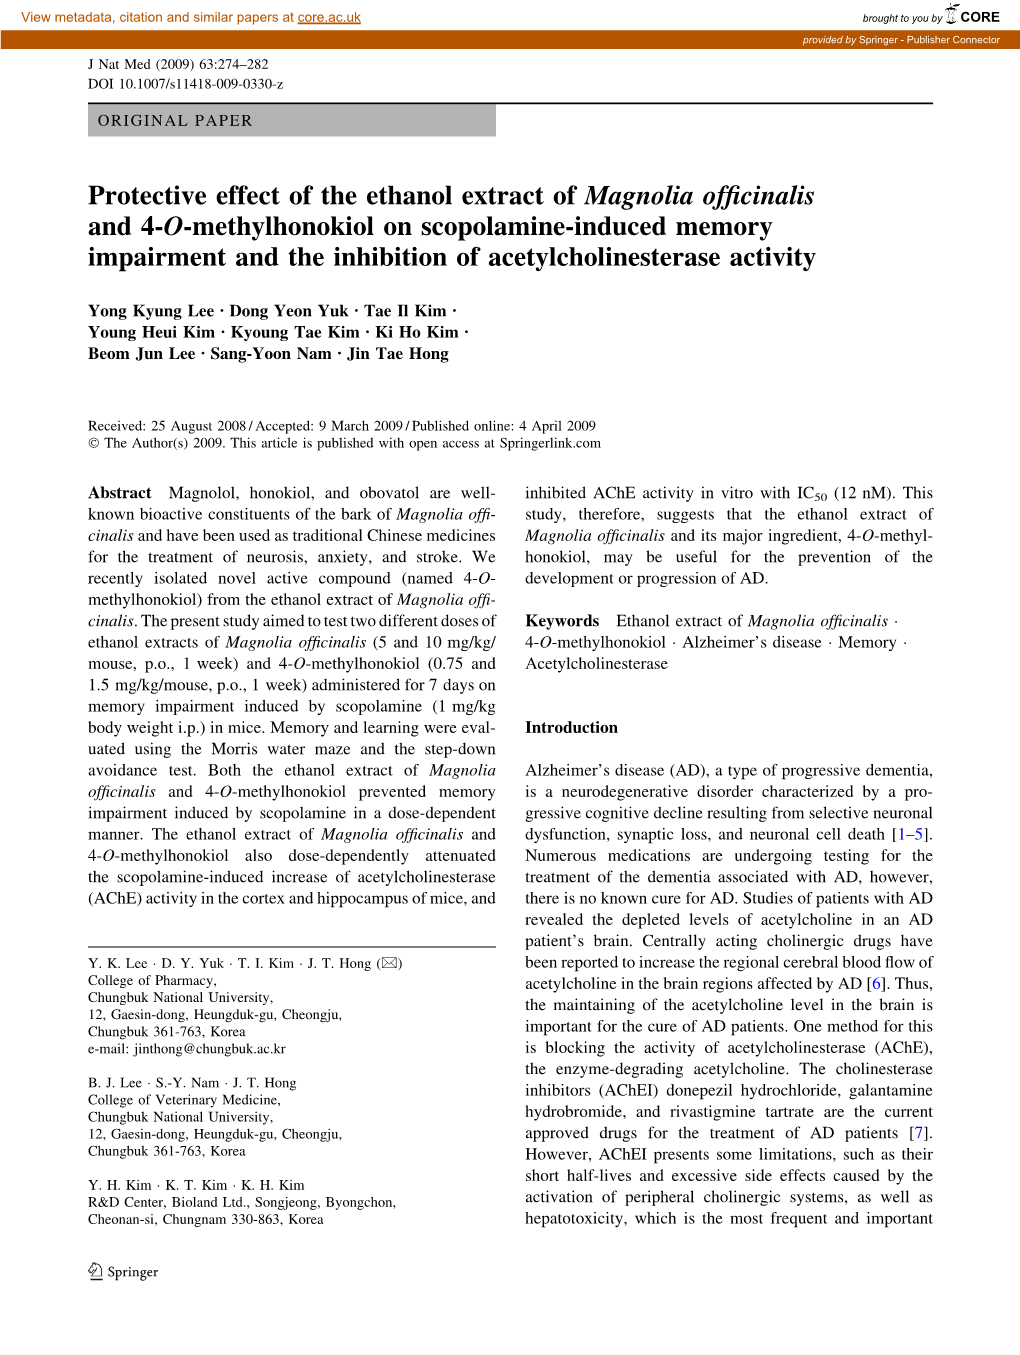 Protective Effect of the Ethanol Extract of Magnolia Officinalis And